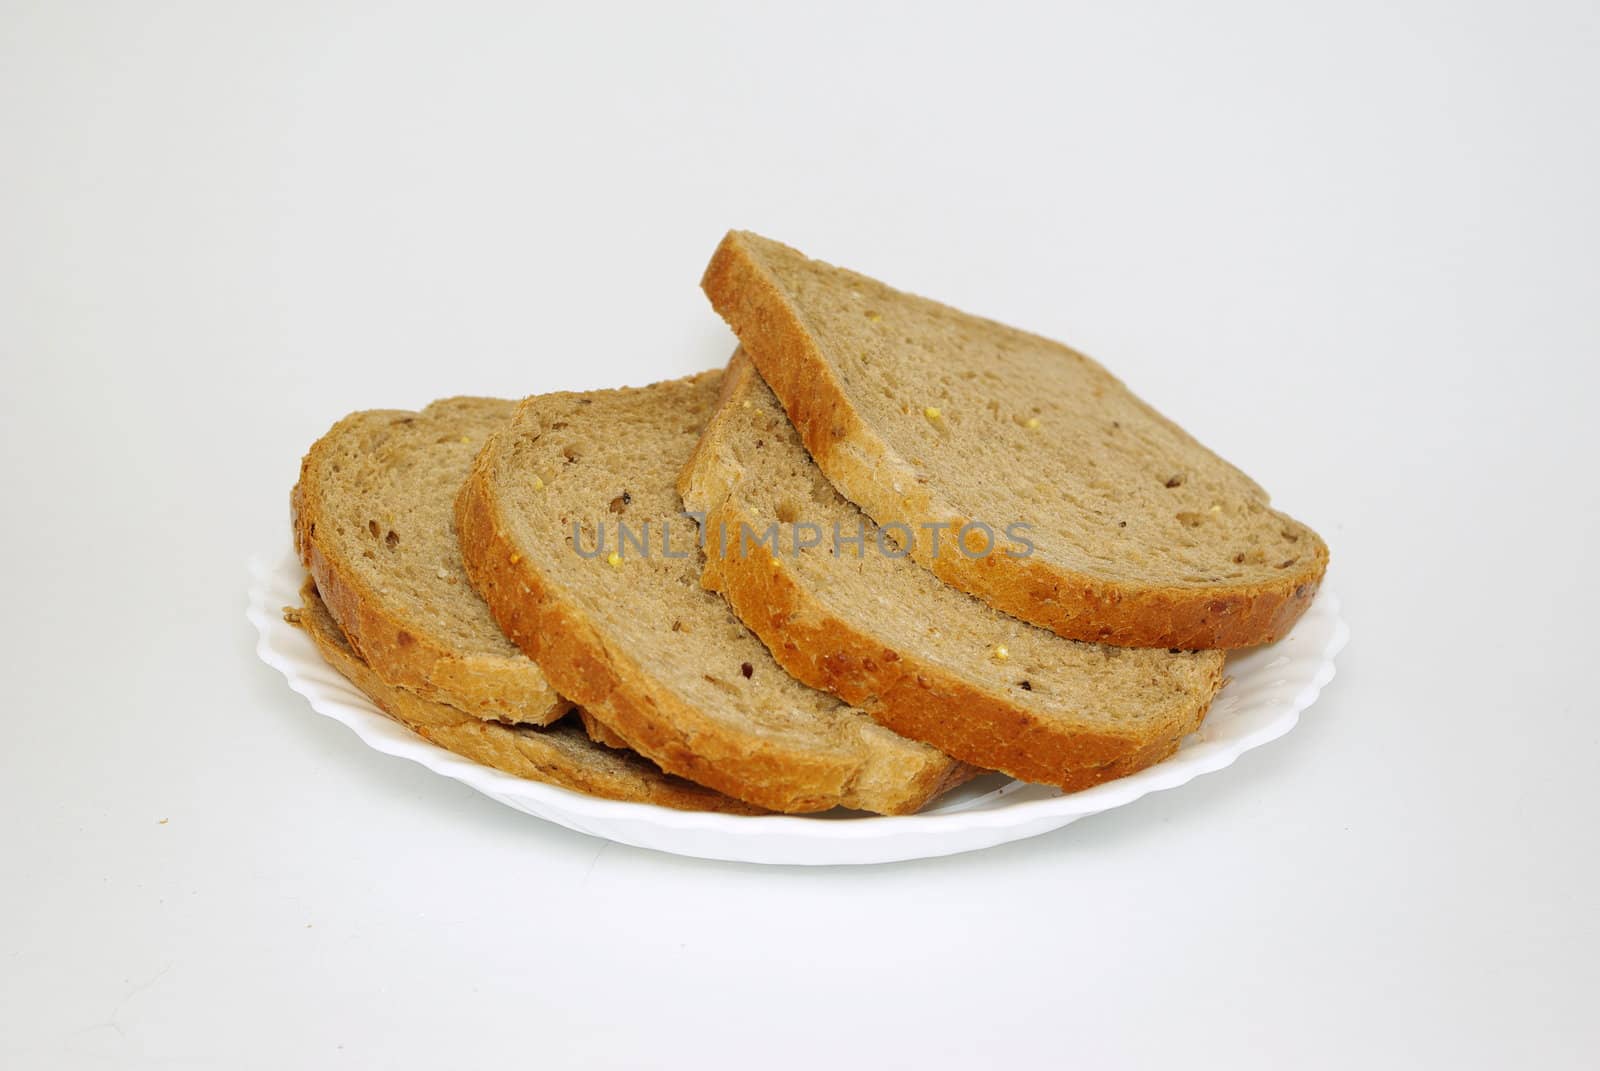 Pieces of bread on white plate